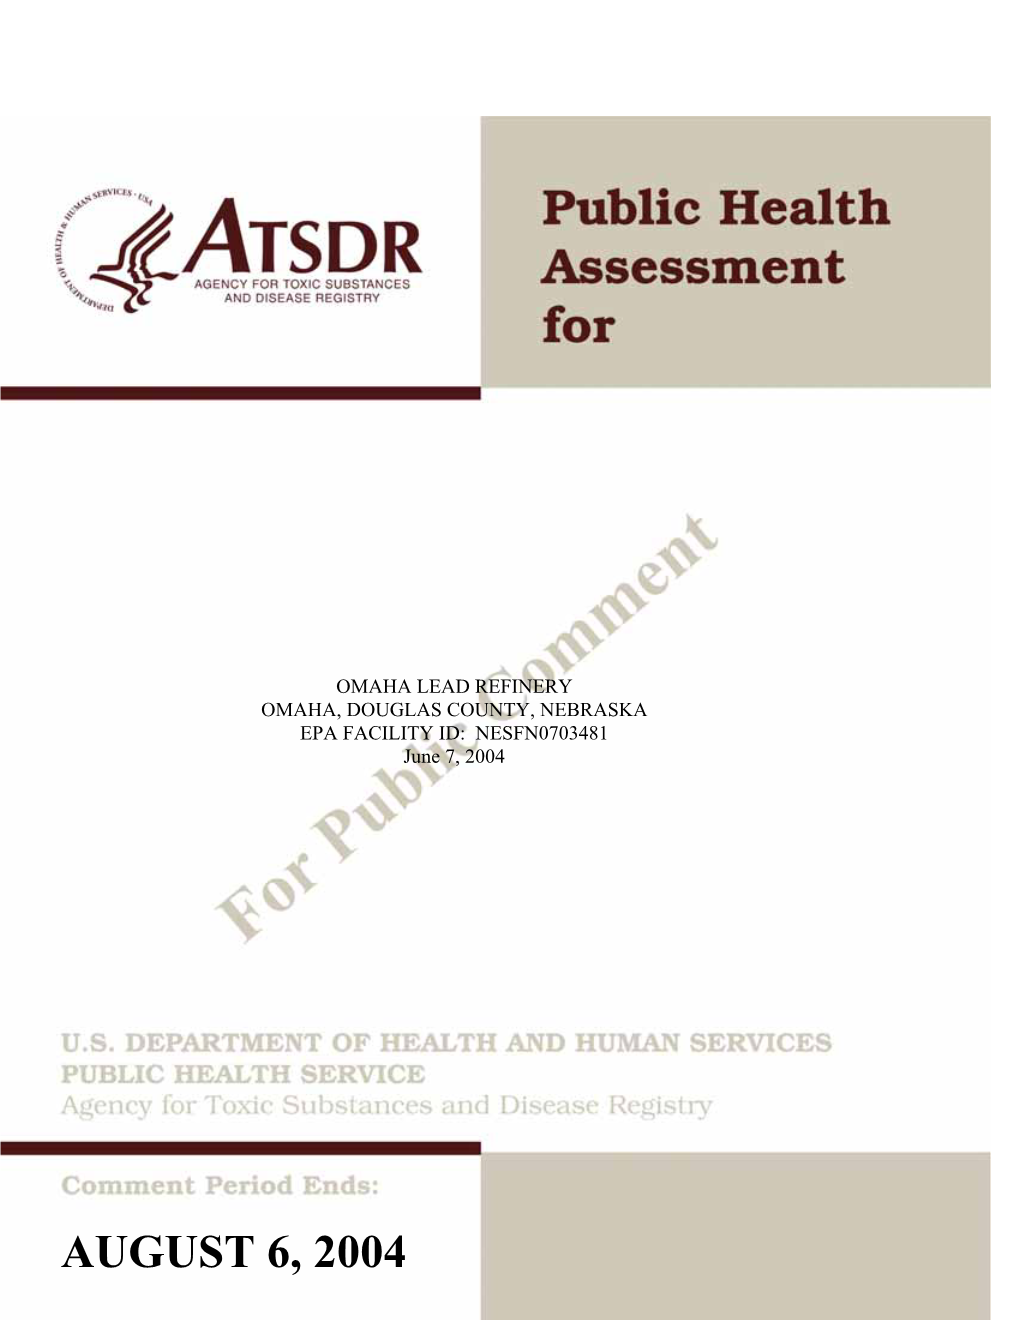 August 6, 2004 the Atsdr Public Health Assessment: a Note of Explanation